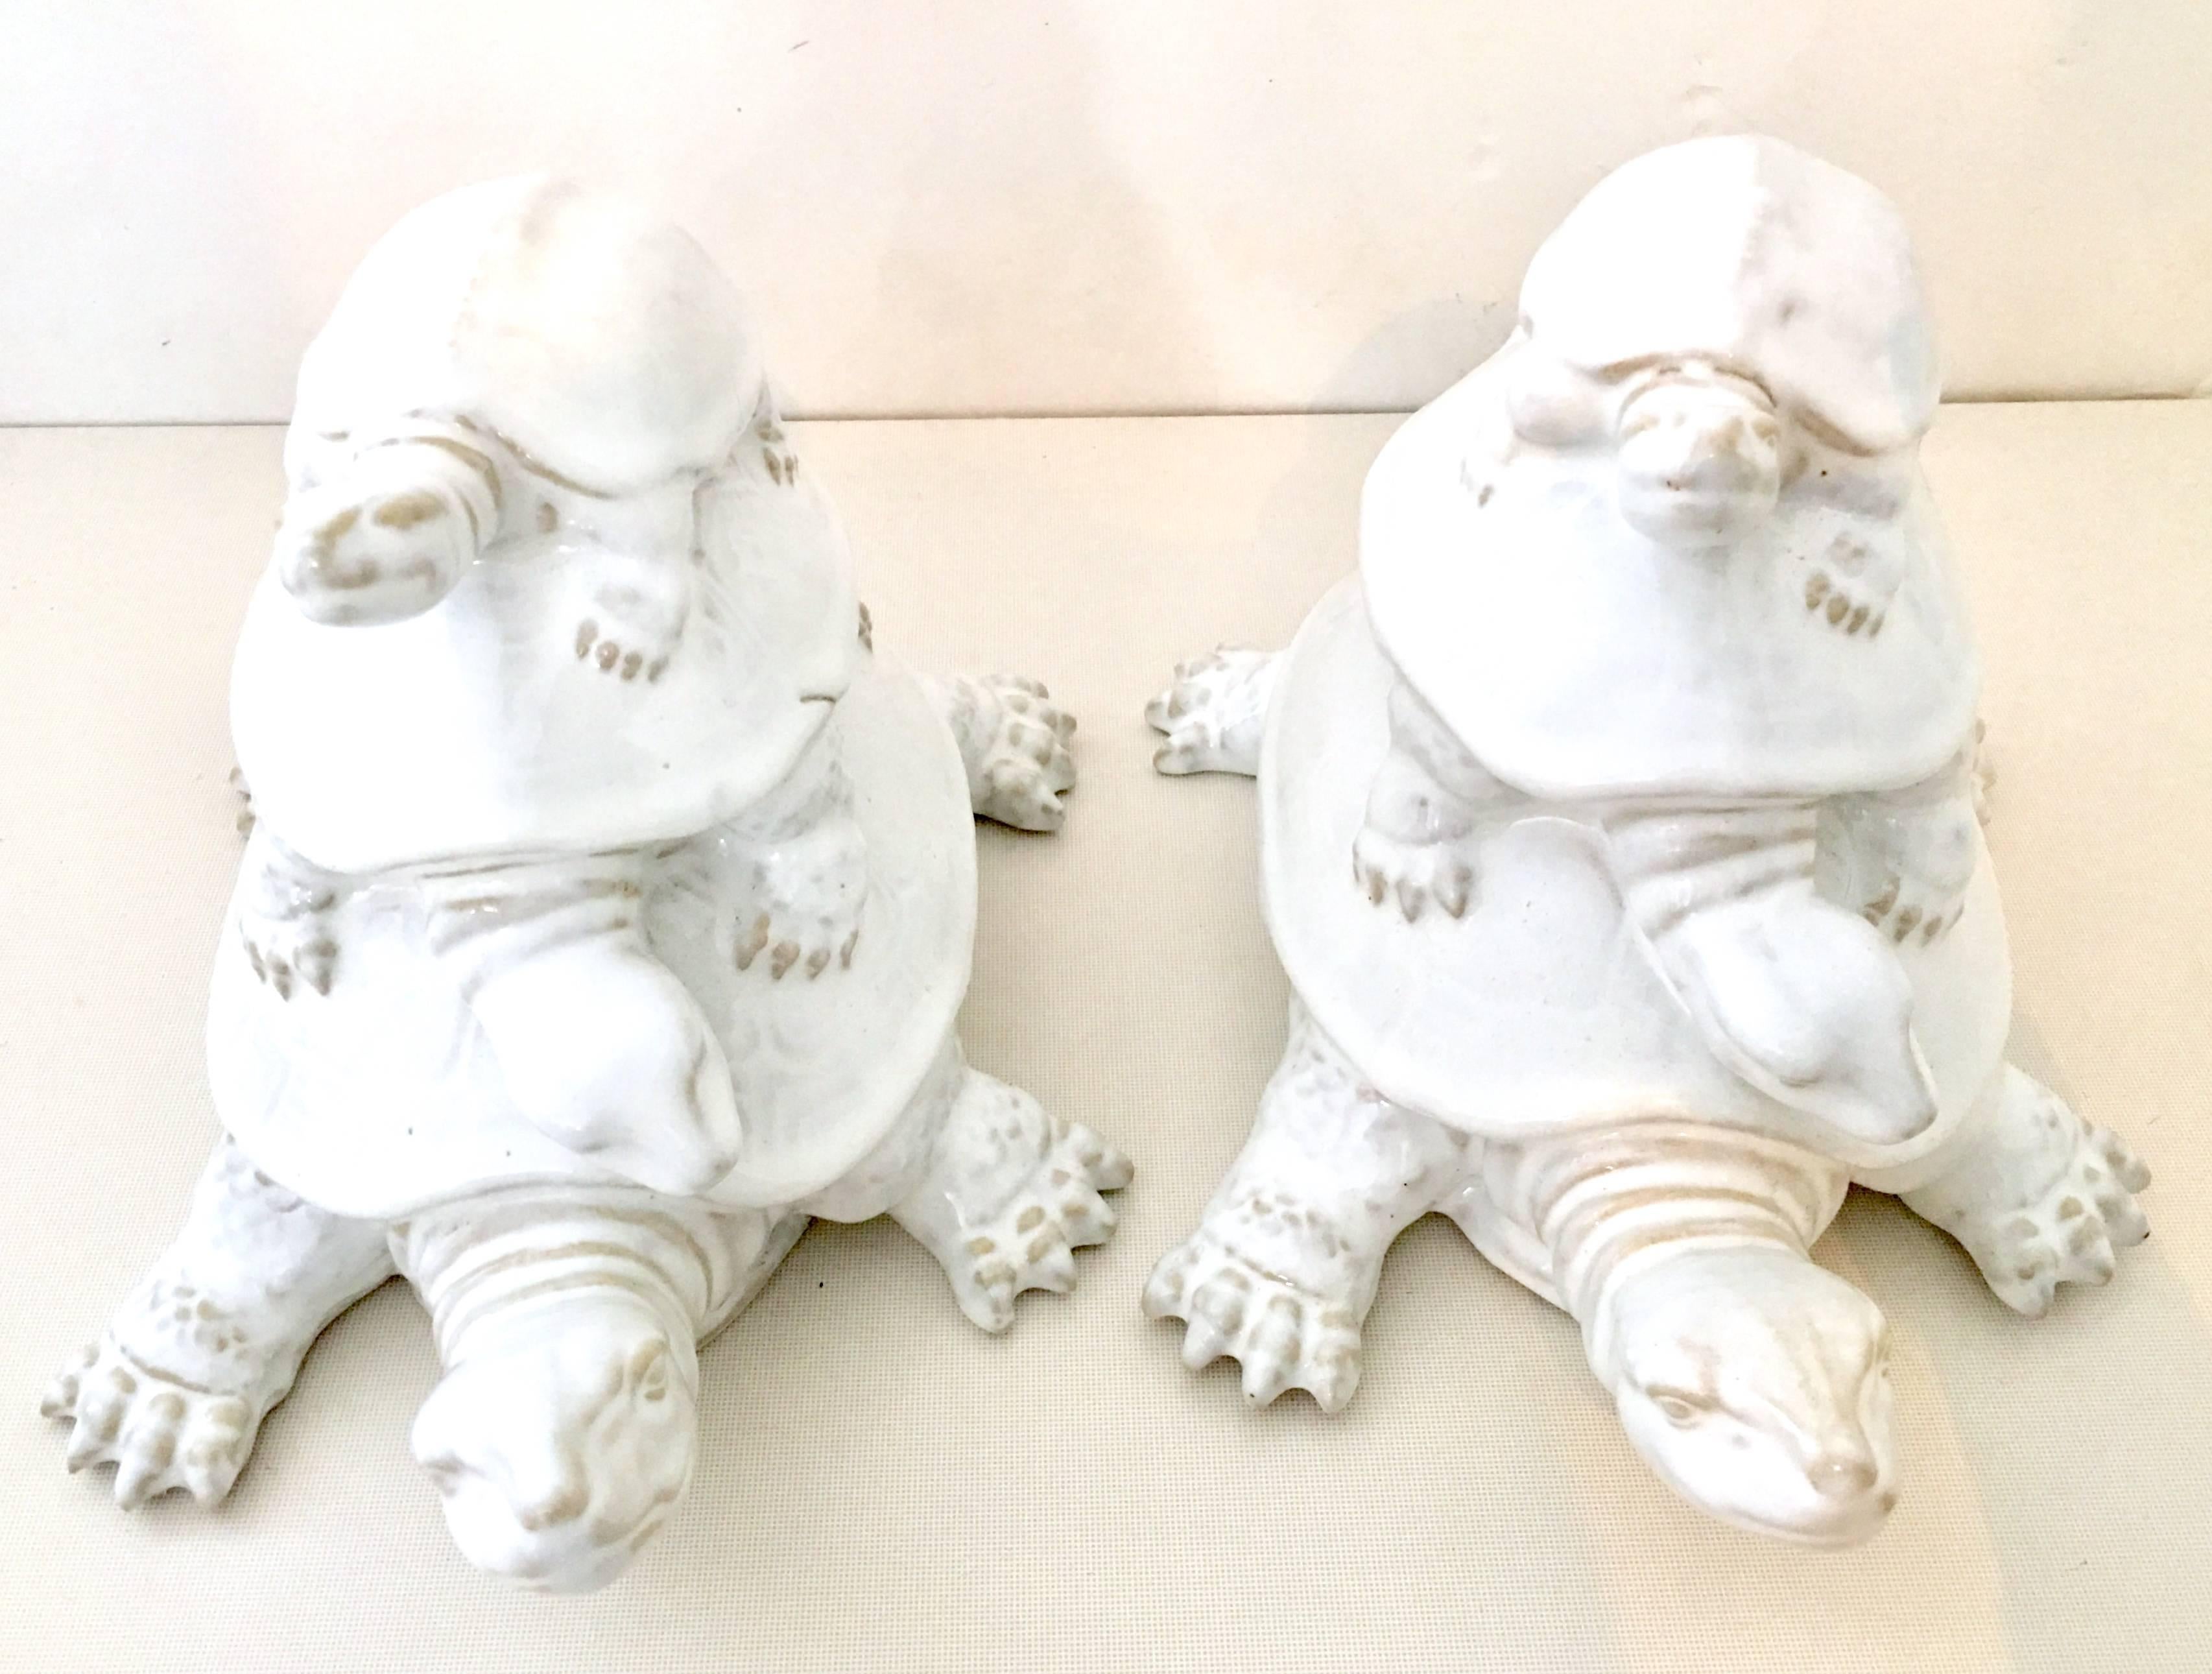 Contemporary & New Pair Of White Glazed Ceramic Triple Turtle Sculptures. Never been used, floor samples.